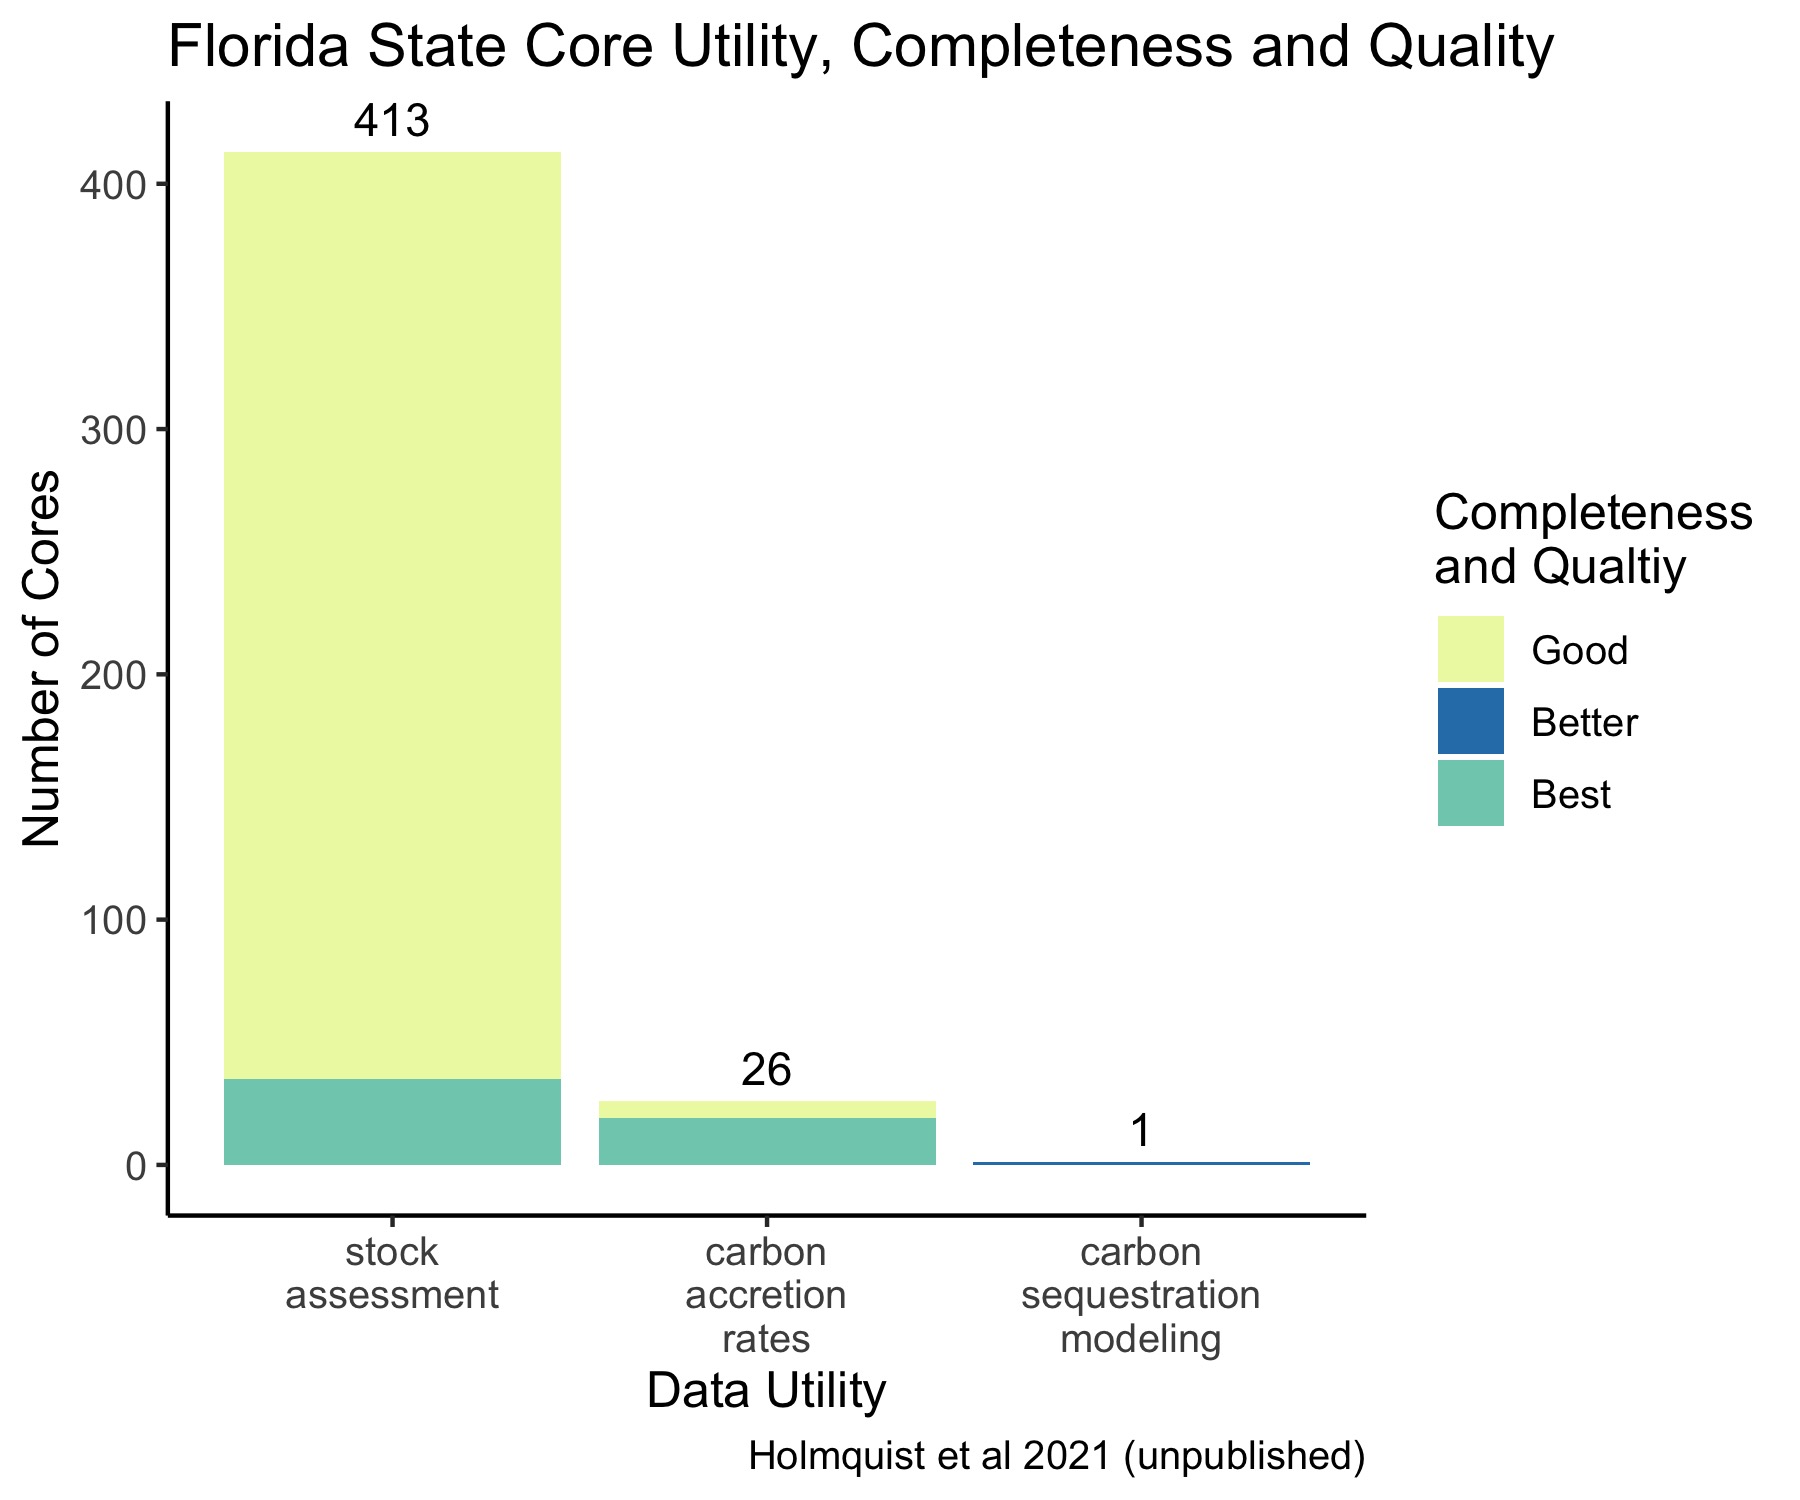 Florida State Core Data Utility, Completeness, and Quality.